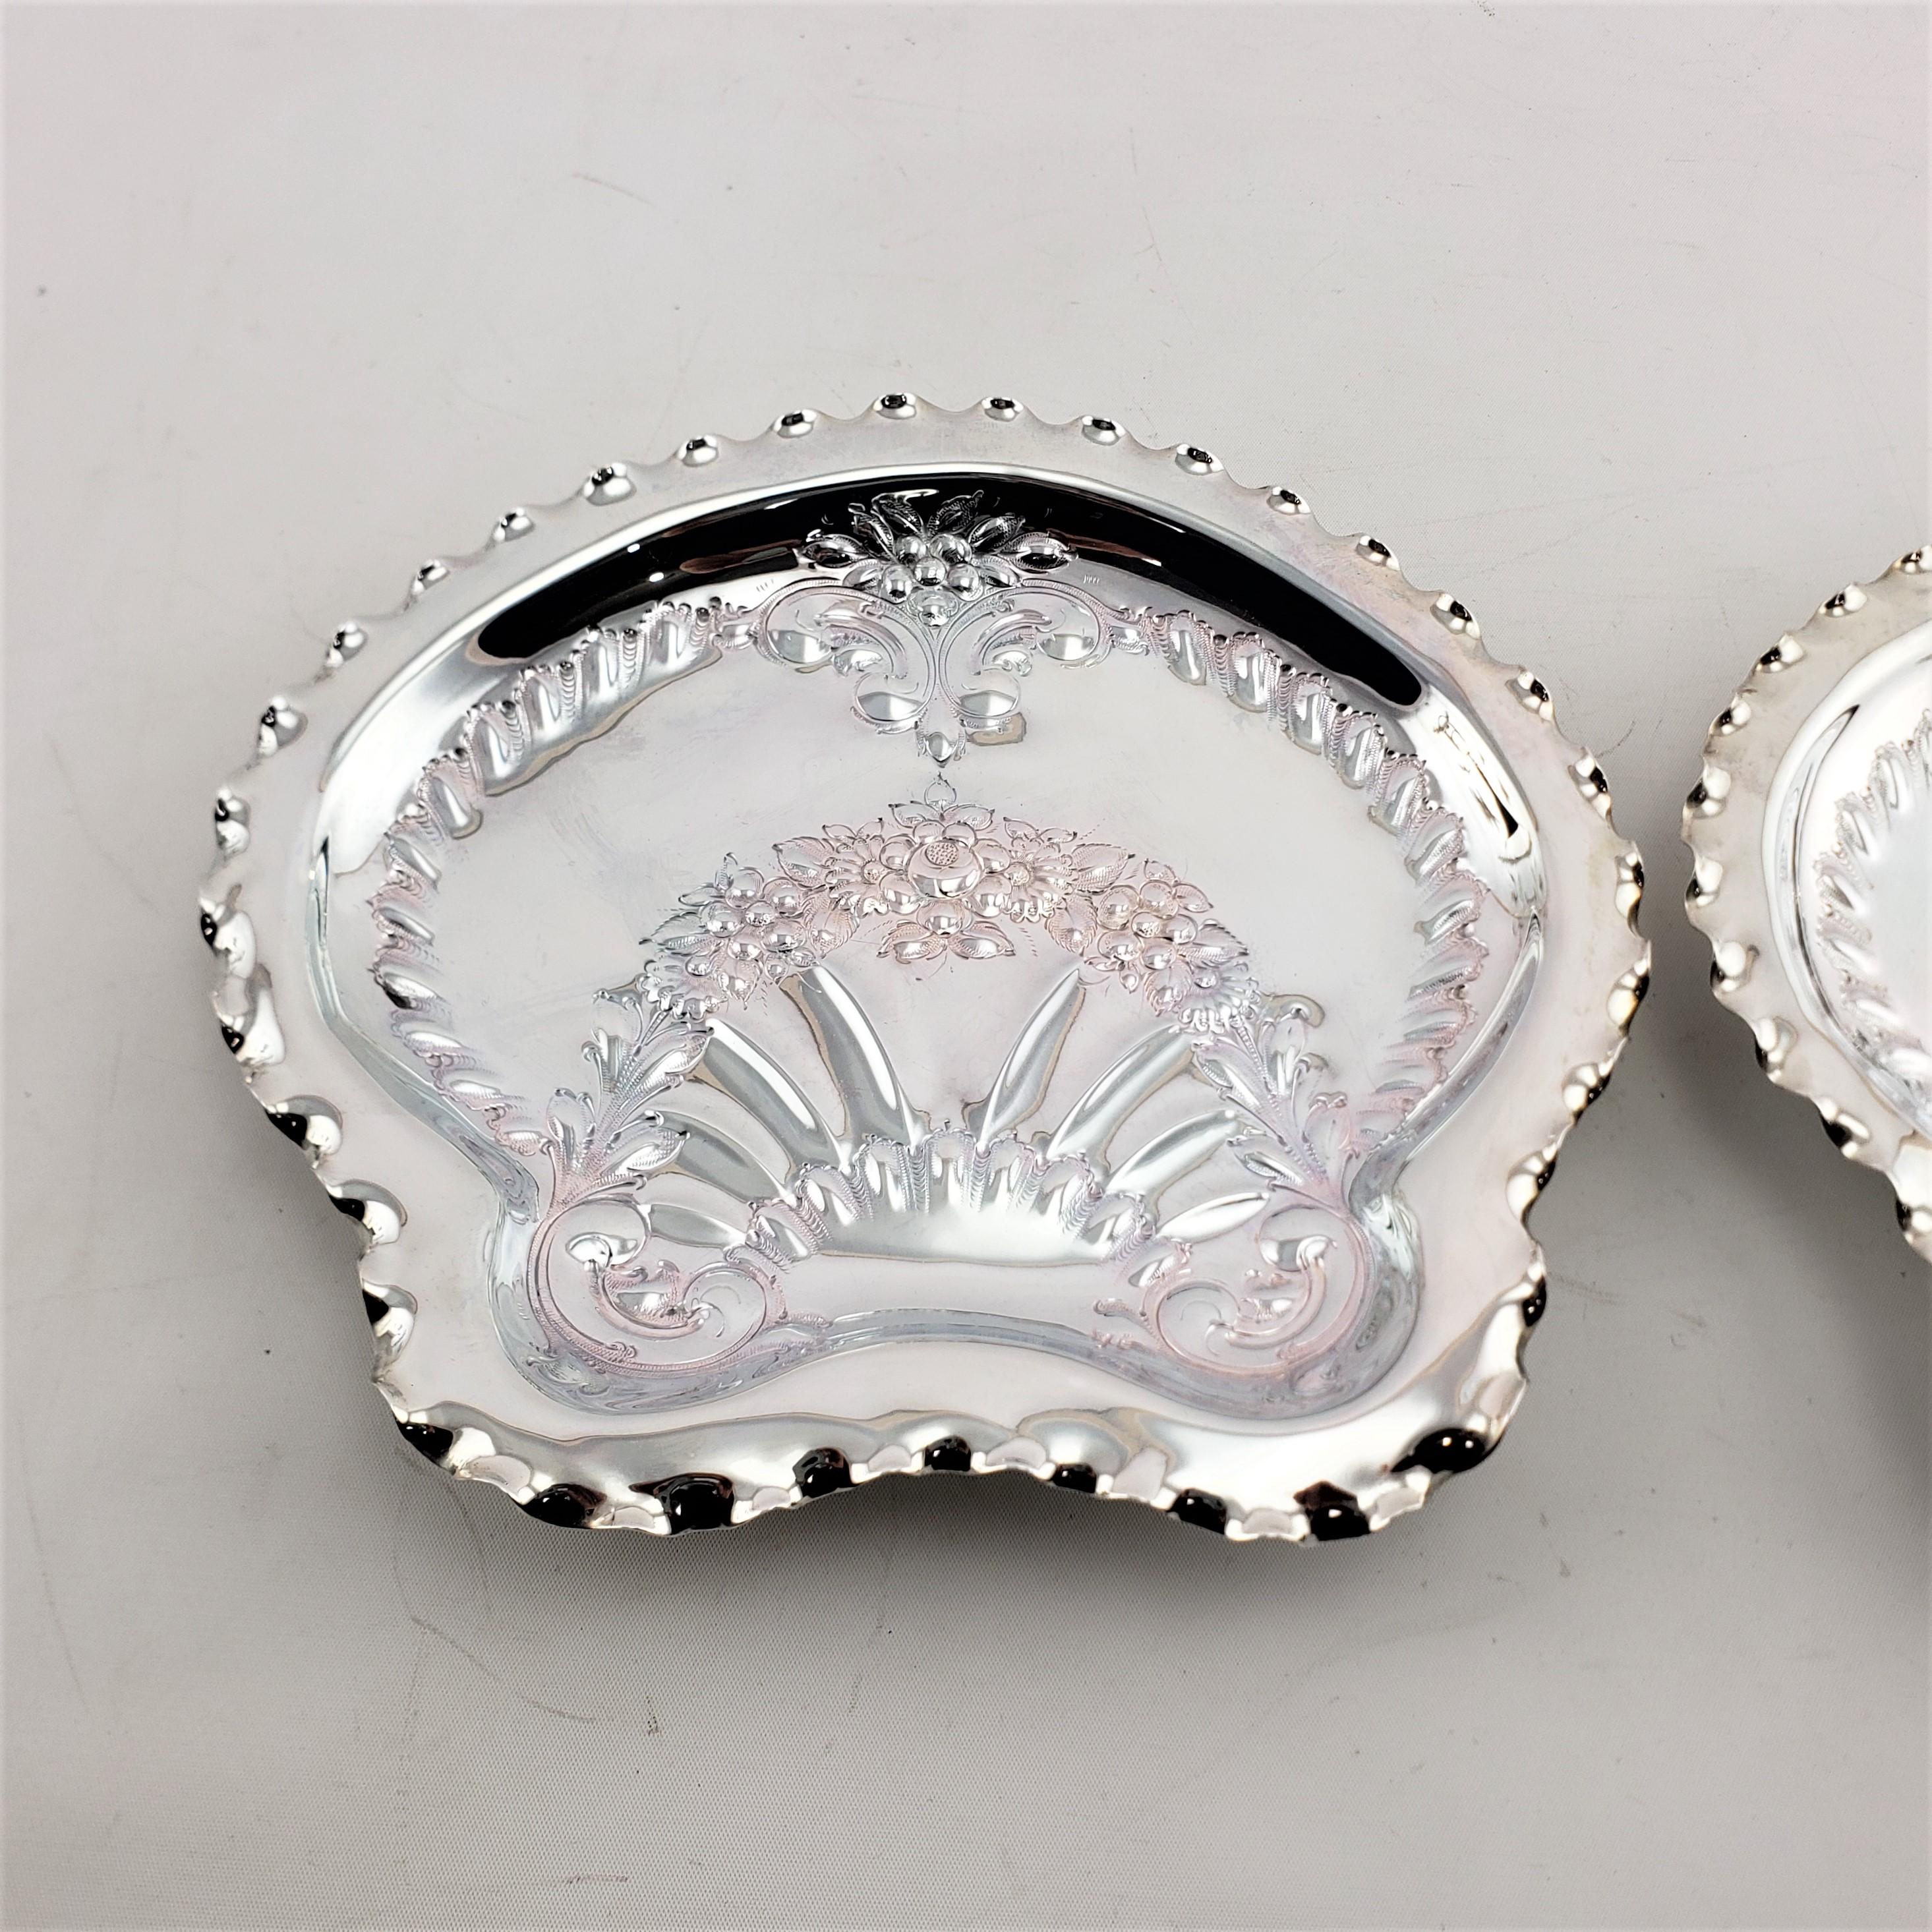 Antique English Silver Plated Strawberry Server Set with Figural Shell Dishes For Sale 7